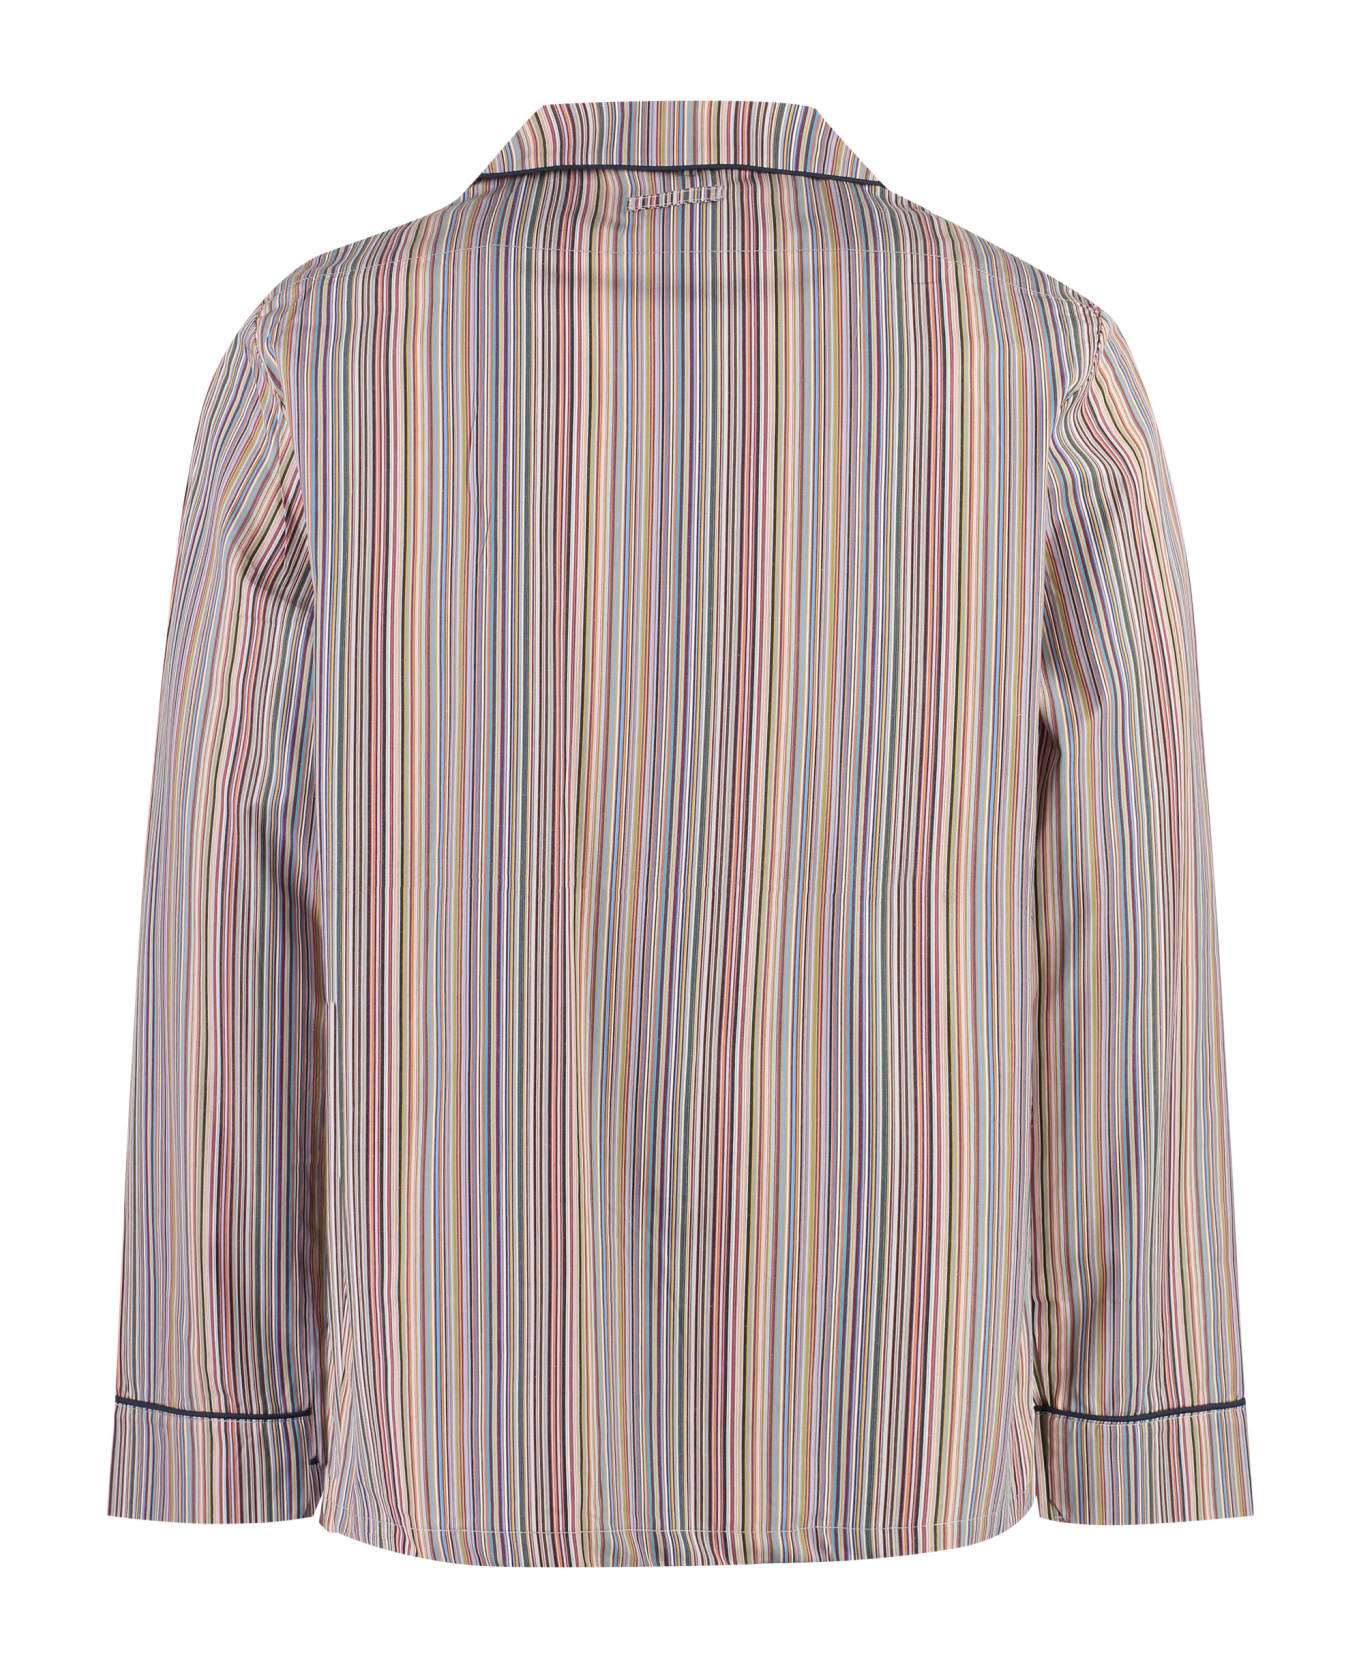 PS by Paul Smith Striped Cotton Pyjamas - Multicolor パジャマ